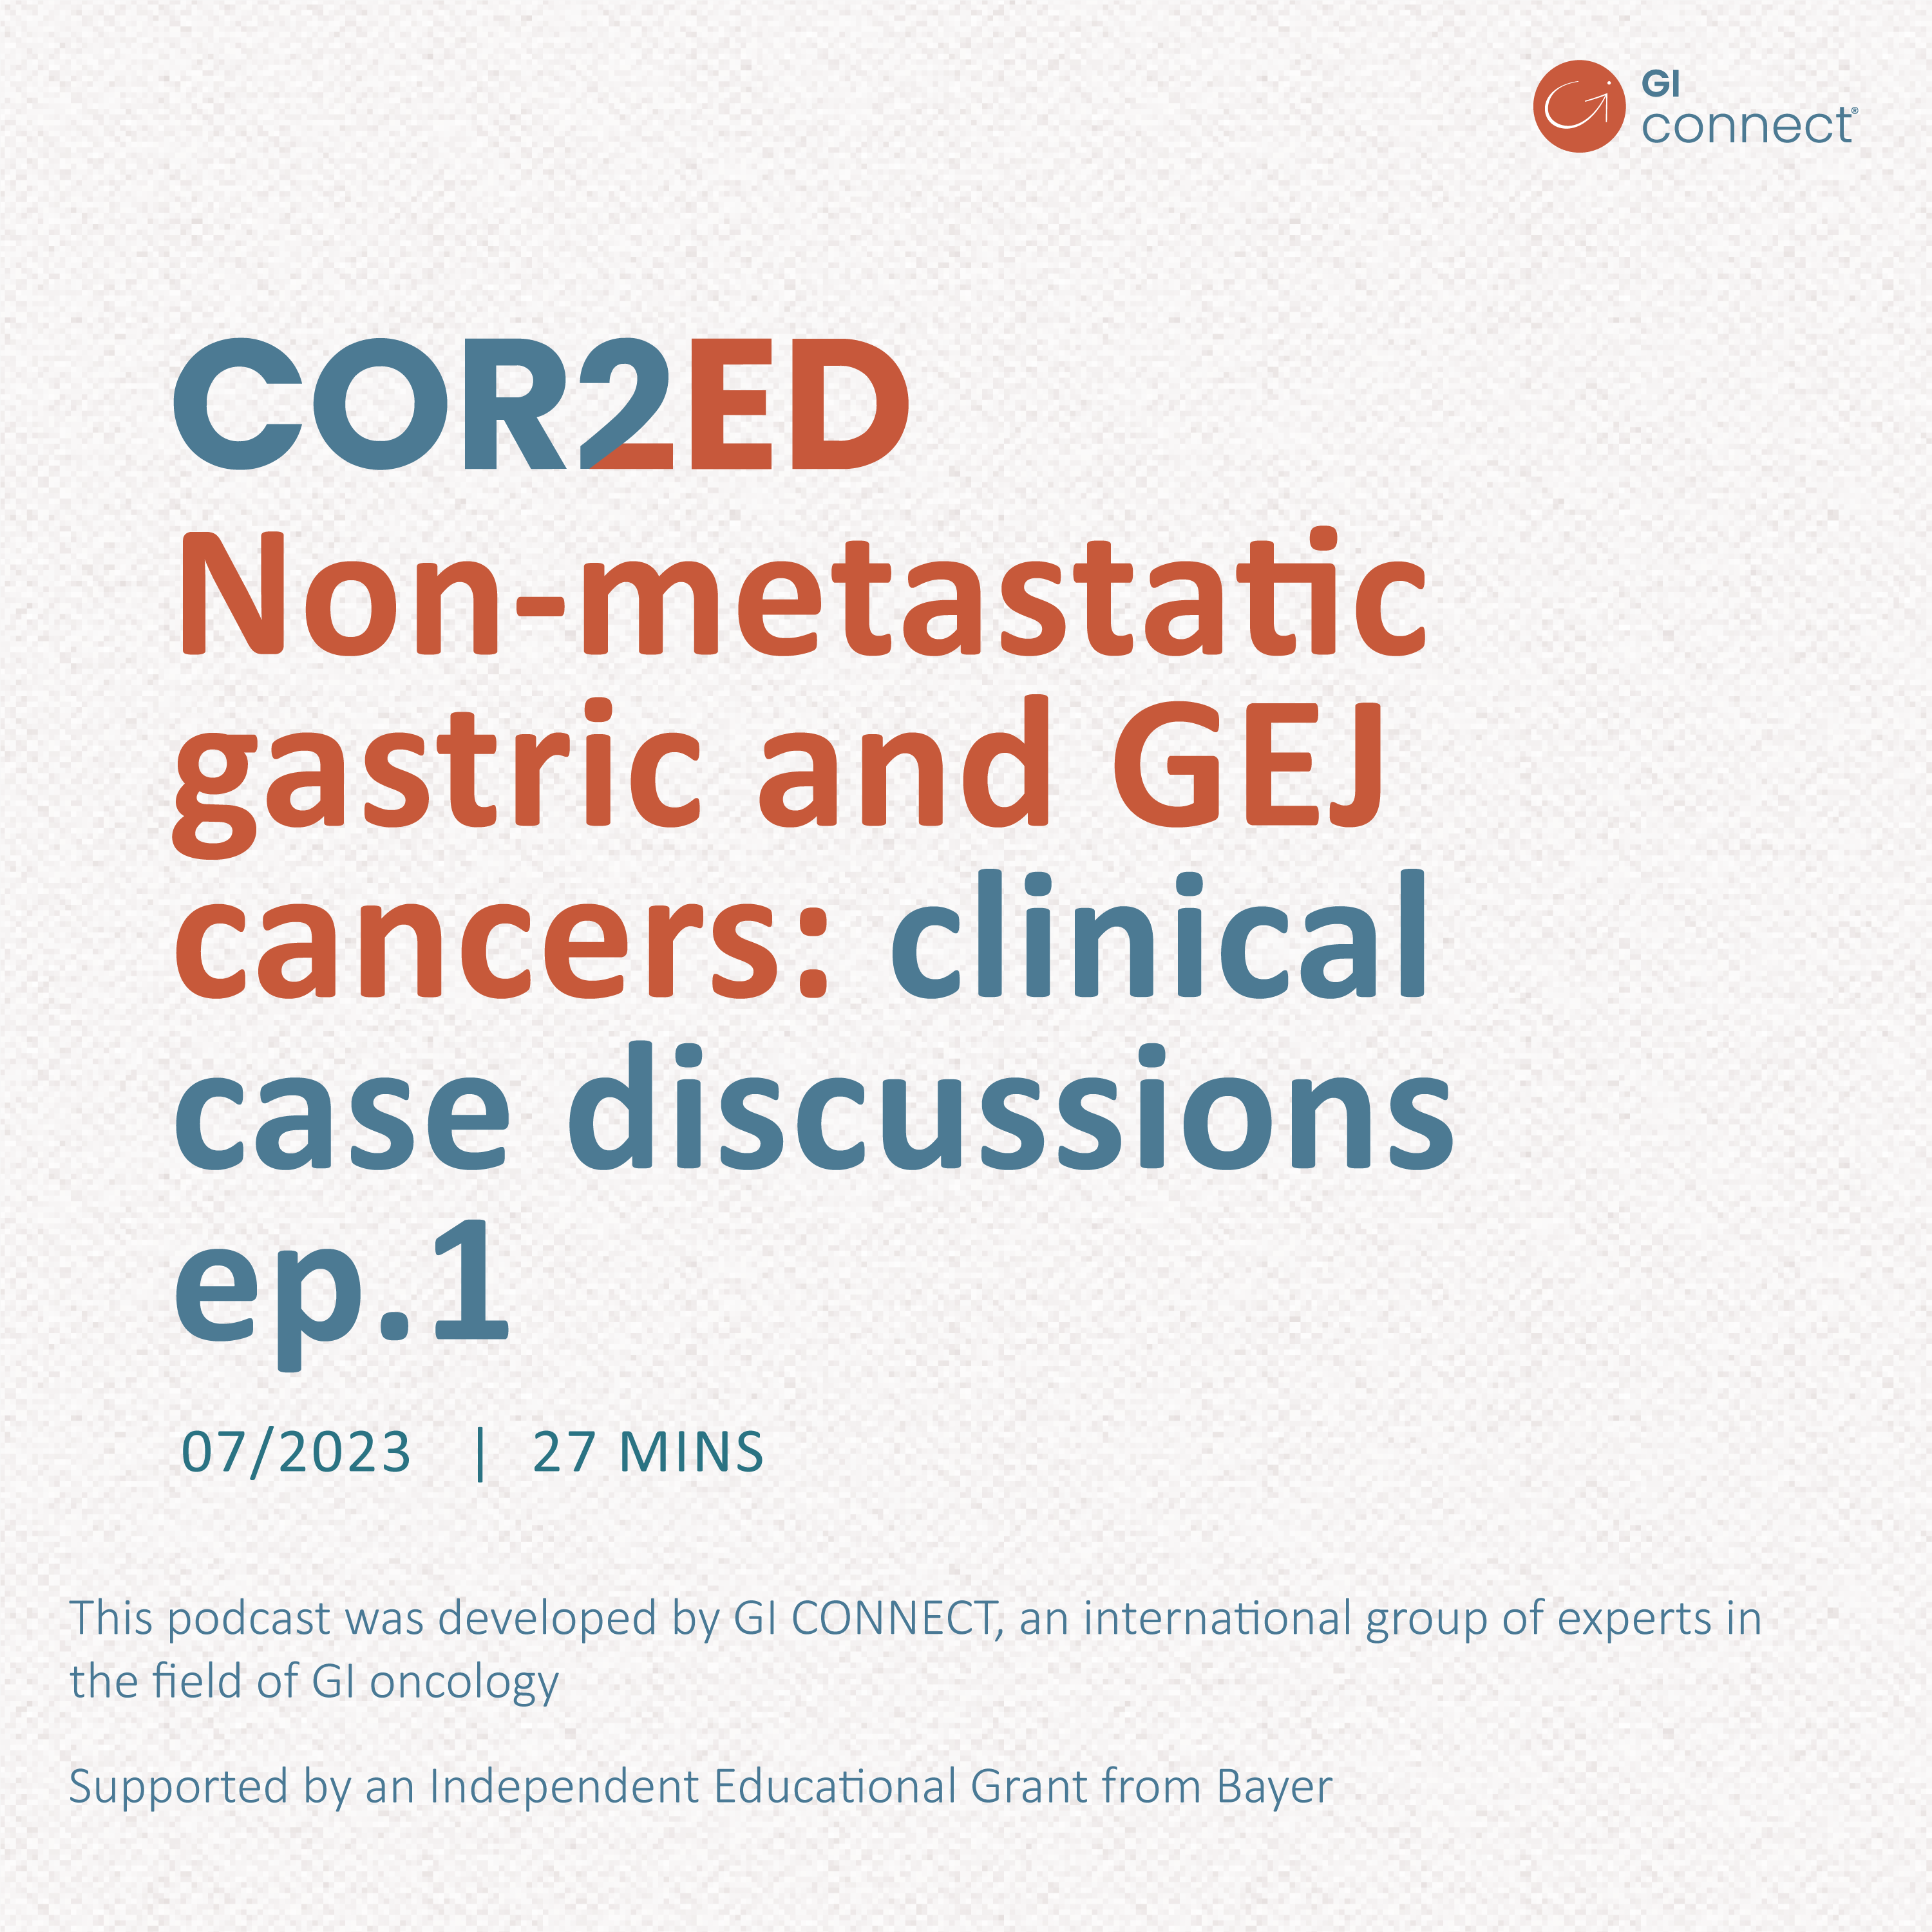 Non-metastatic gastric and GEJ cancers: clinical case discussions ep.1